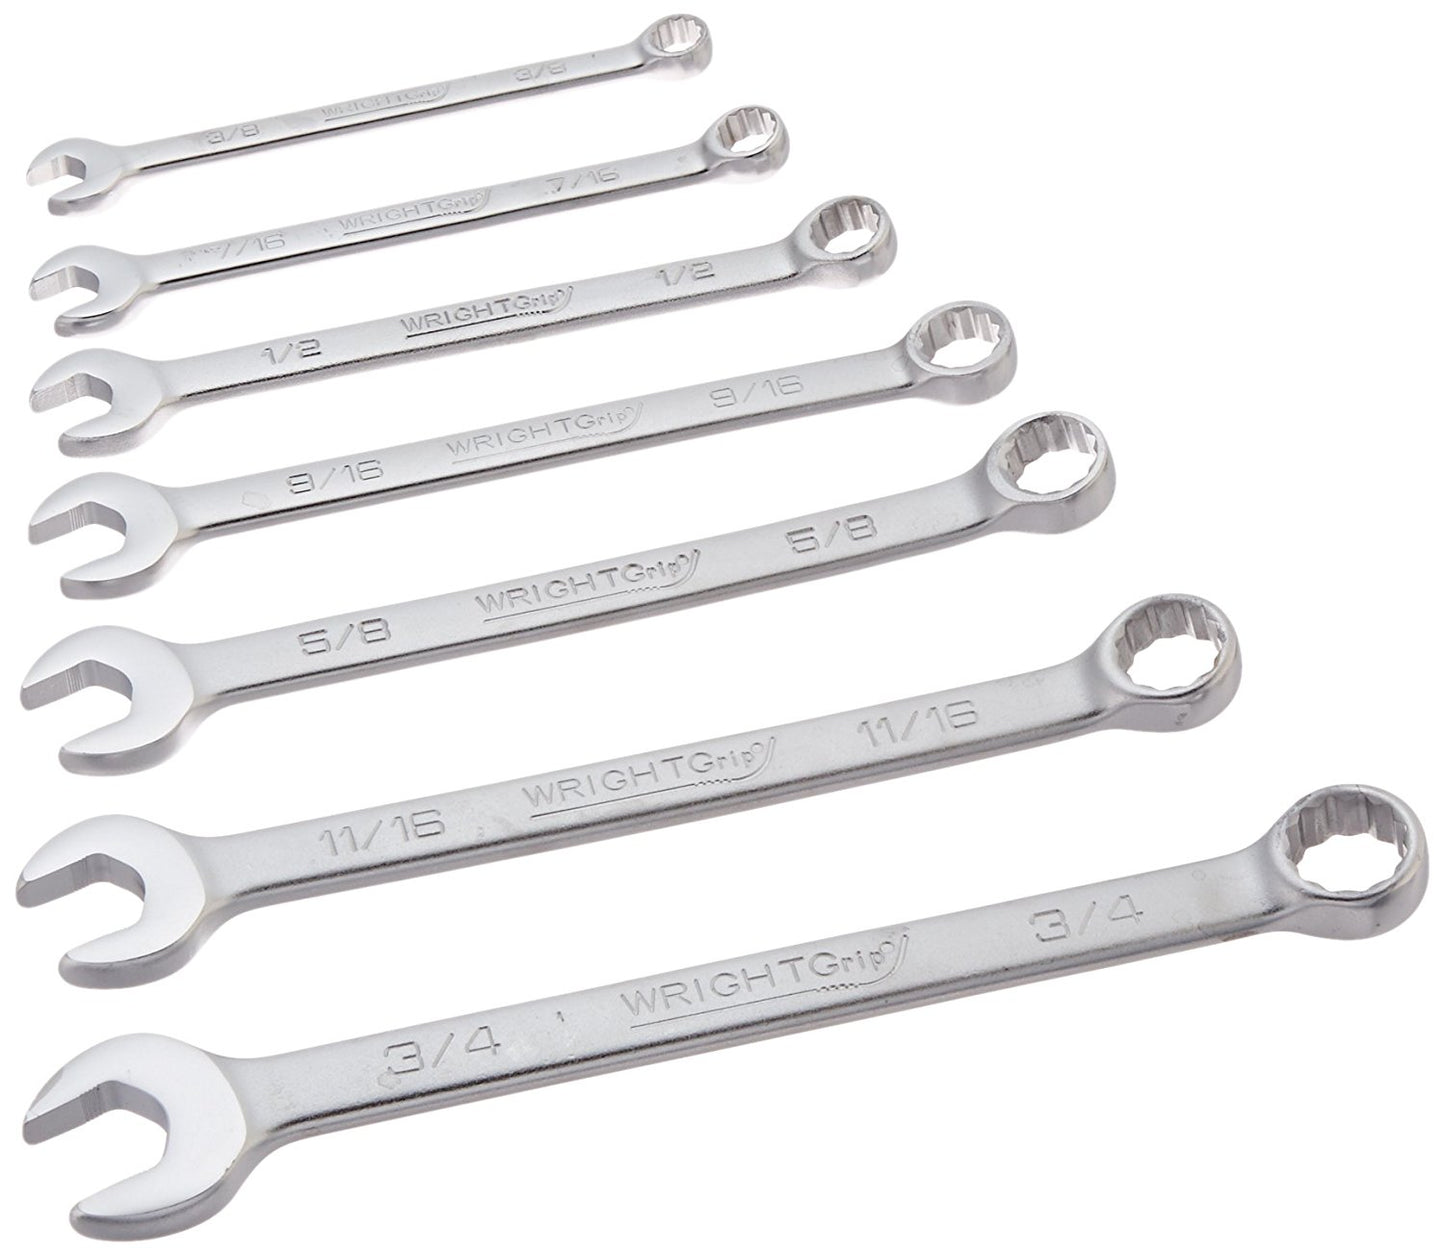 7 Pc. Combination Wrench Set 3/8 - 3/4" 12 Point (707WR)